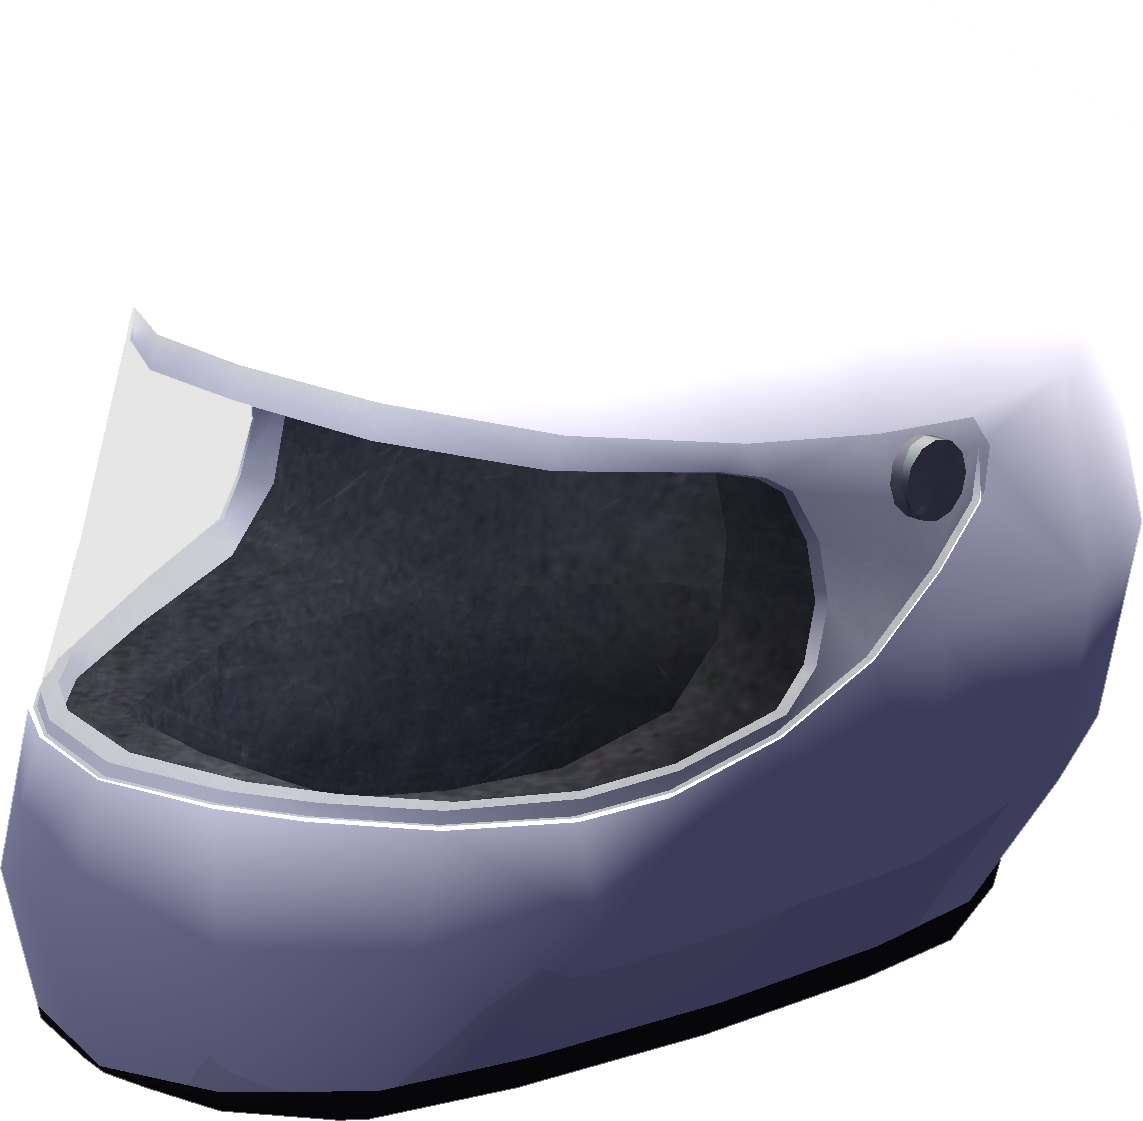 https://static.wikia.nocookie.net/my-summer-car/images/3/37/Helmet.png/revision/latest?cb=20200507123252